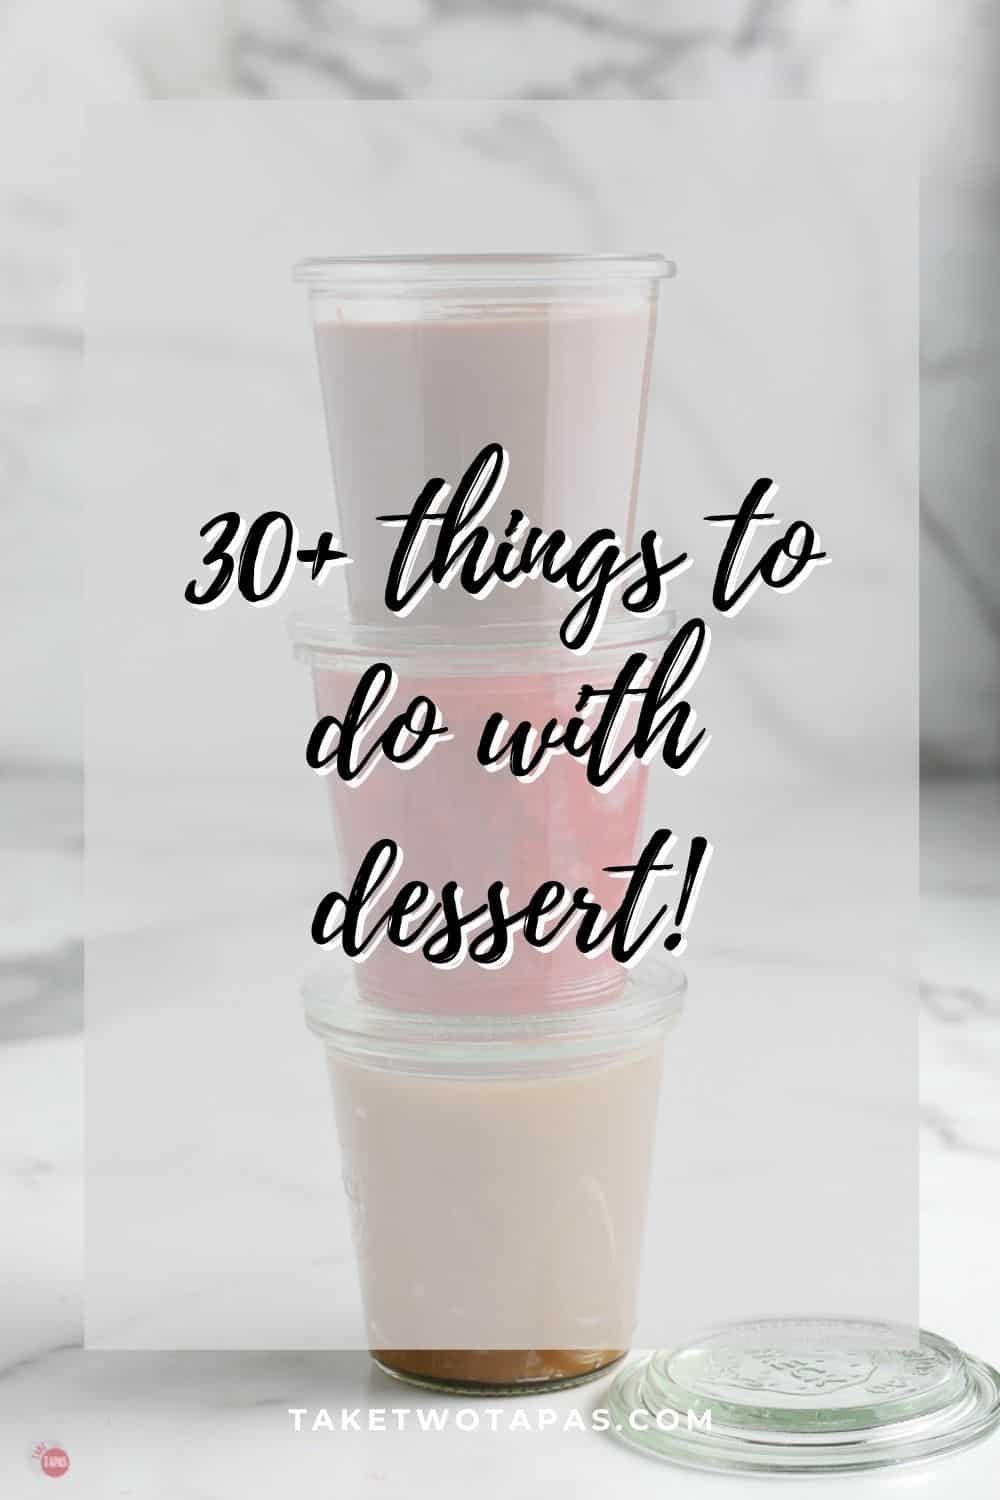 pic of sauces with text "30+ things to do with dessert"